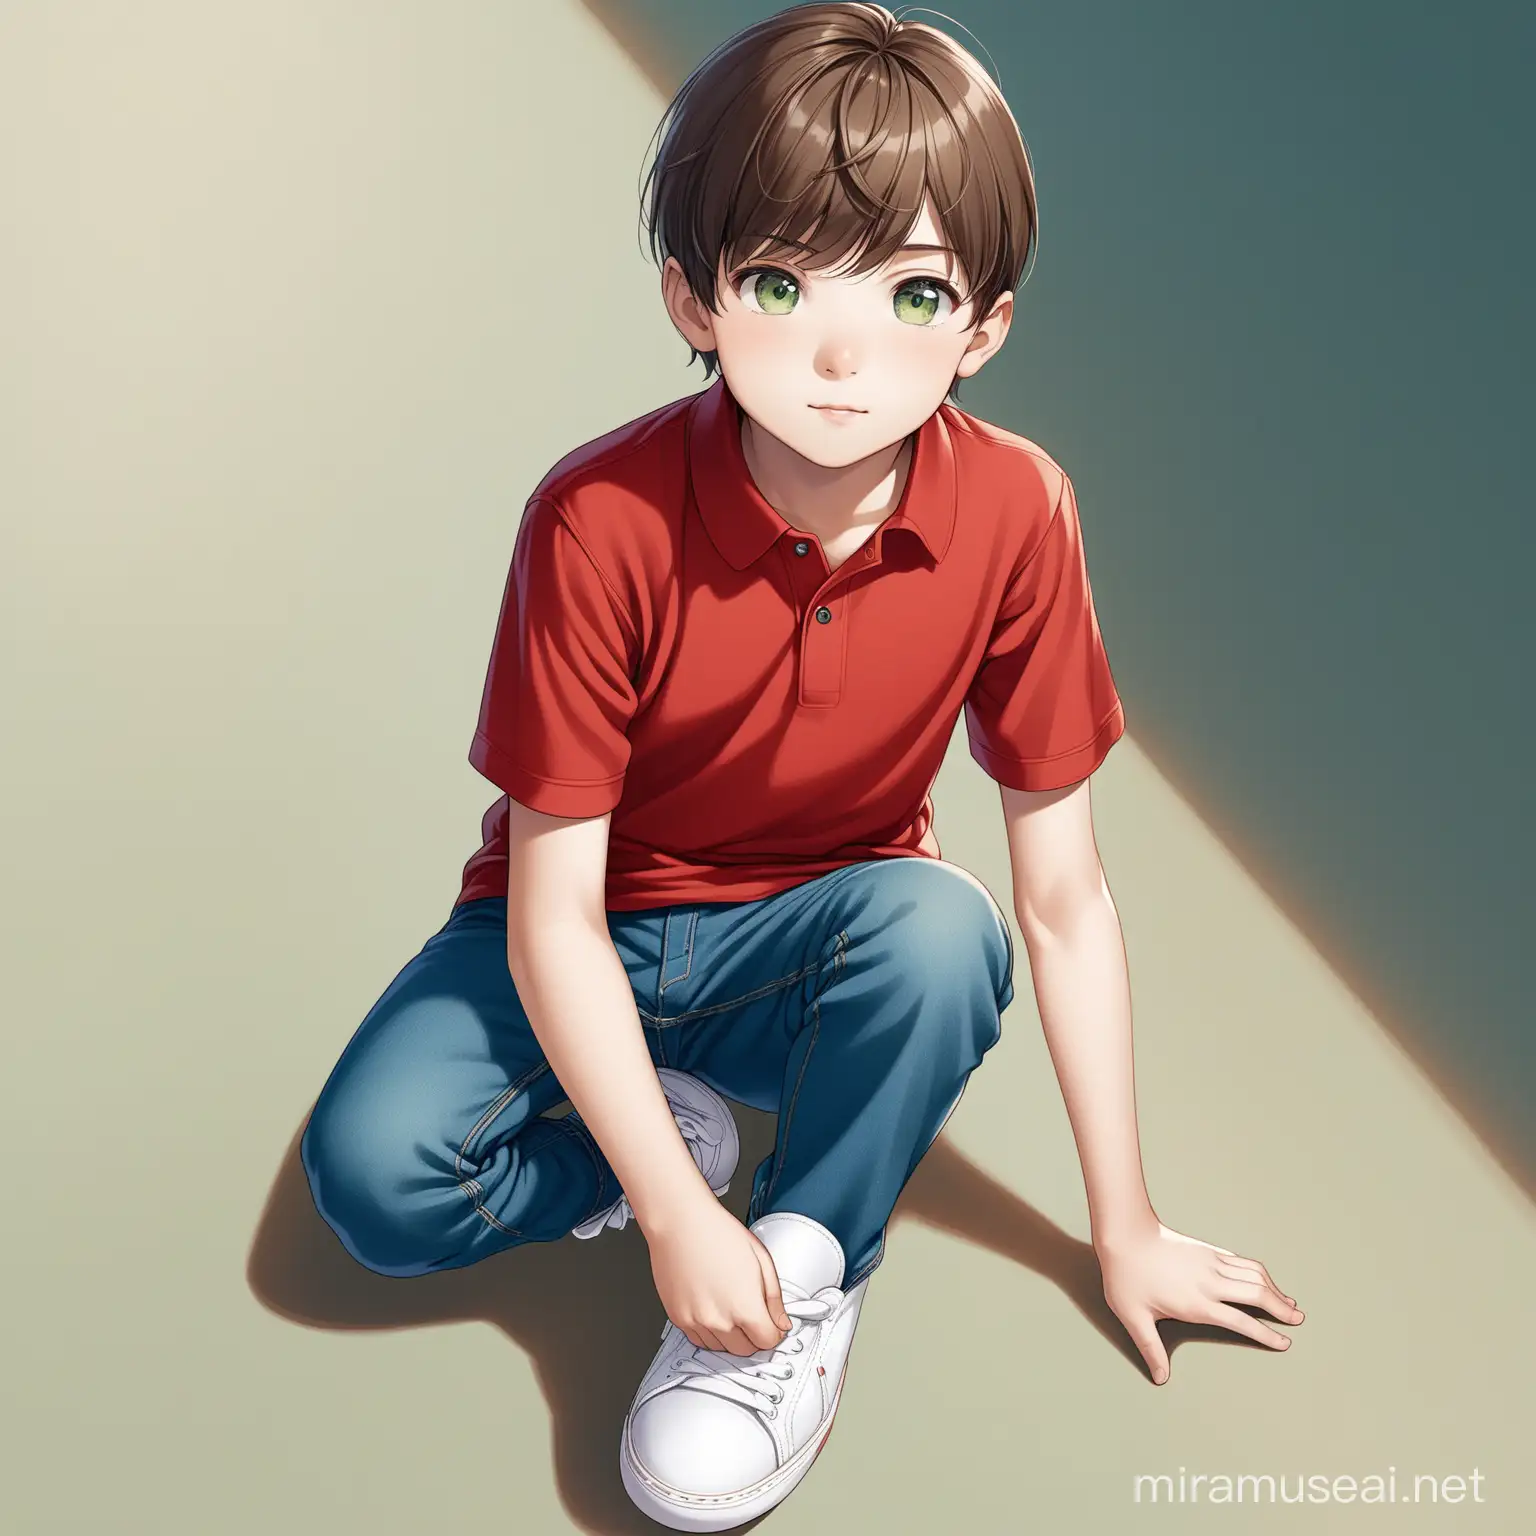 Ten-year-old boy with fair skin, brown hair with bangs, grayish green eyes, wearing a red polo t-shirt, blue jeans and white sneakers